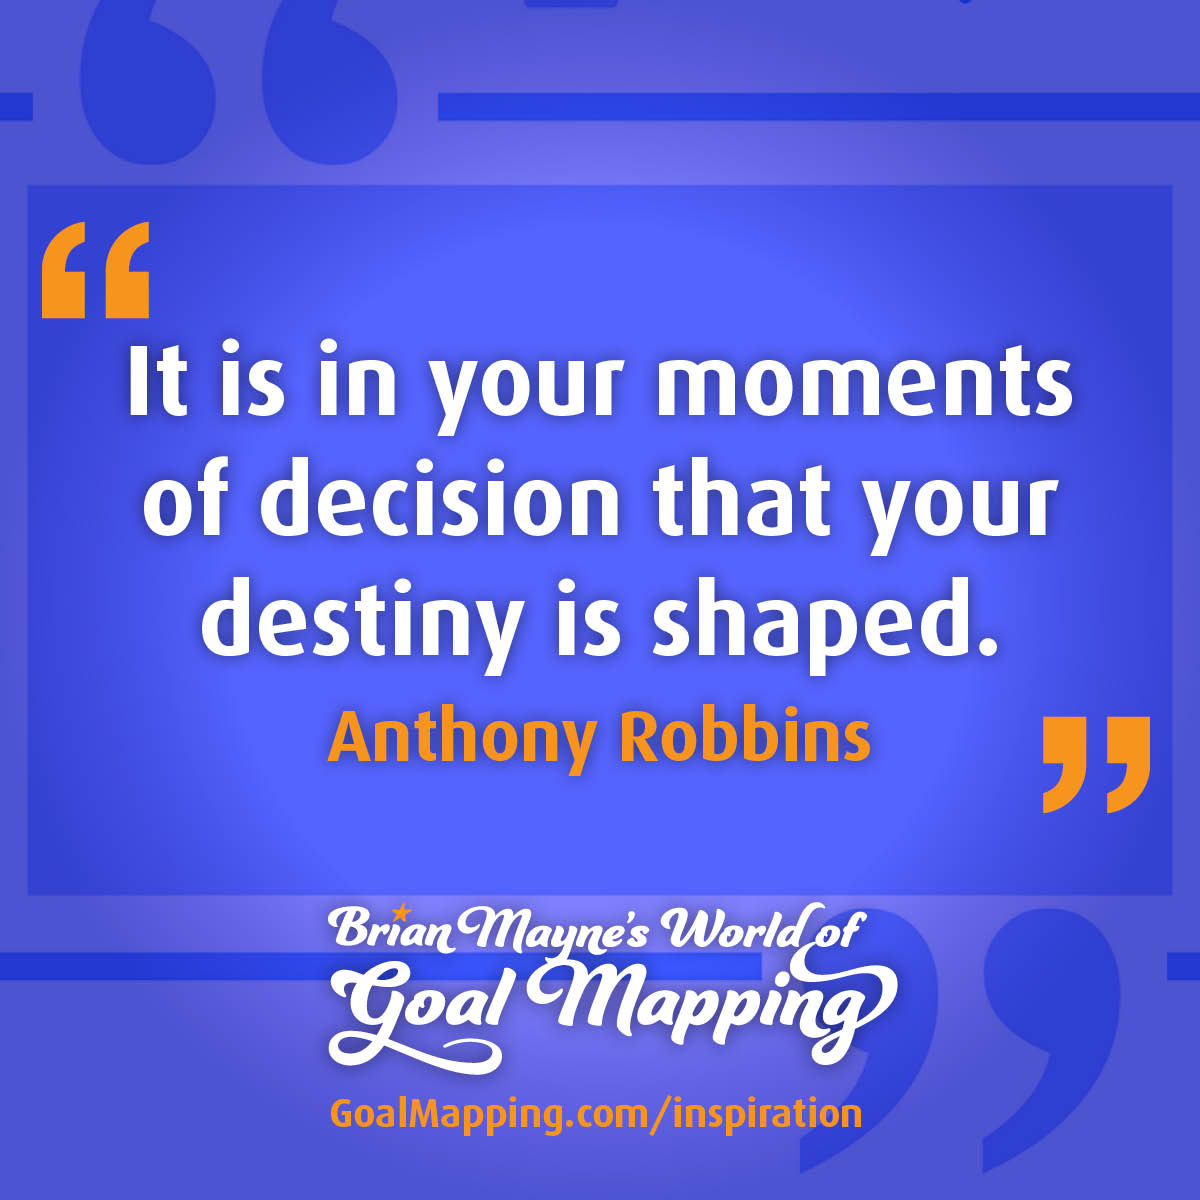 "It is in your moments of decision that your destiny is shaped." Anthony Robbins